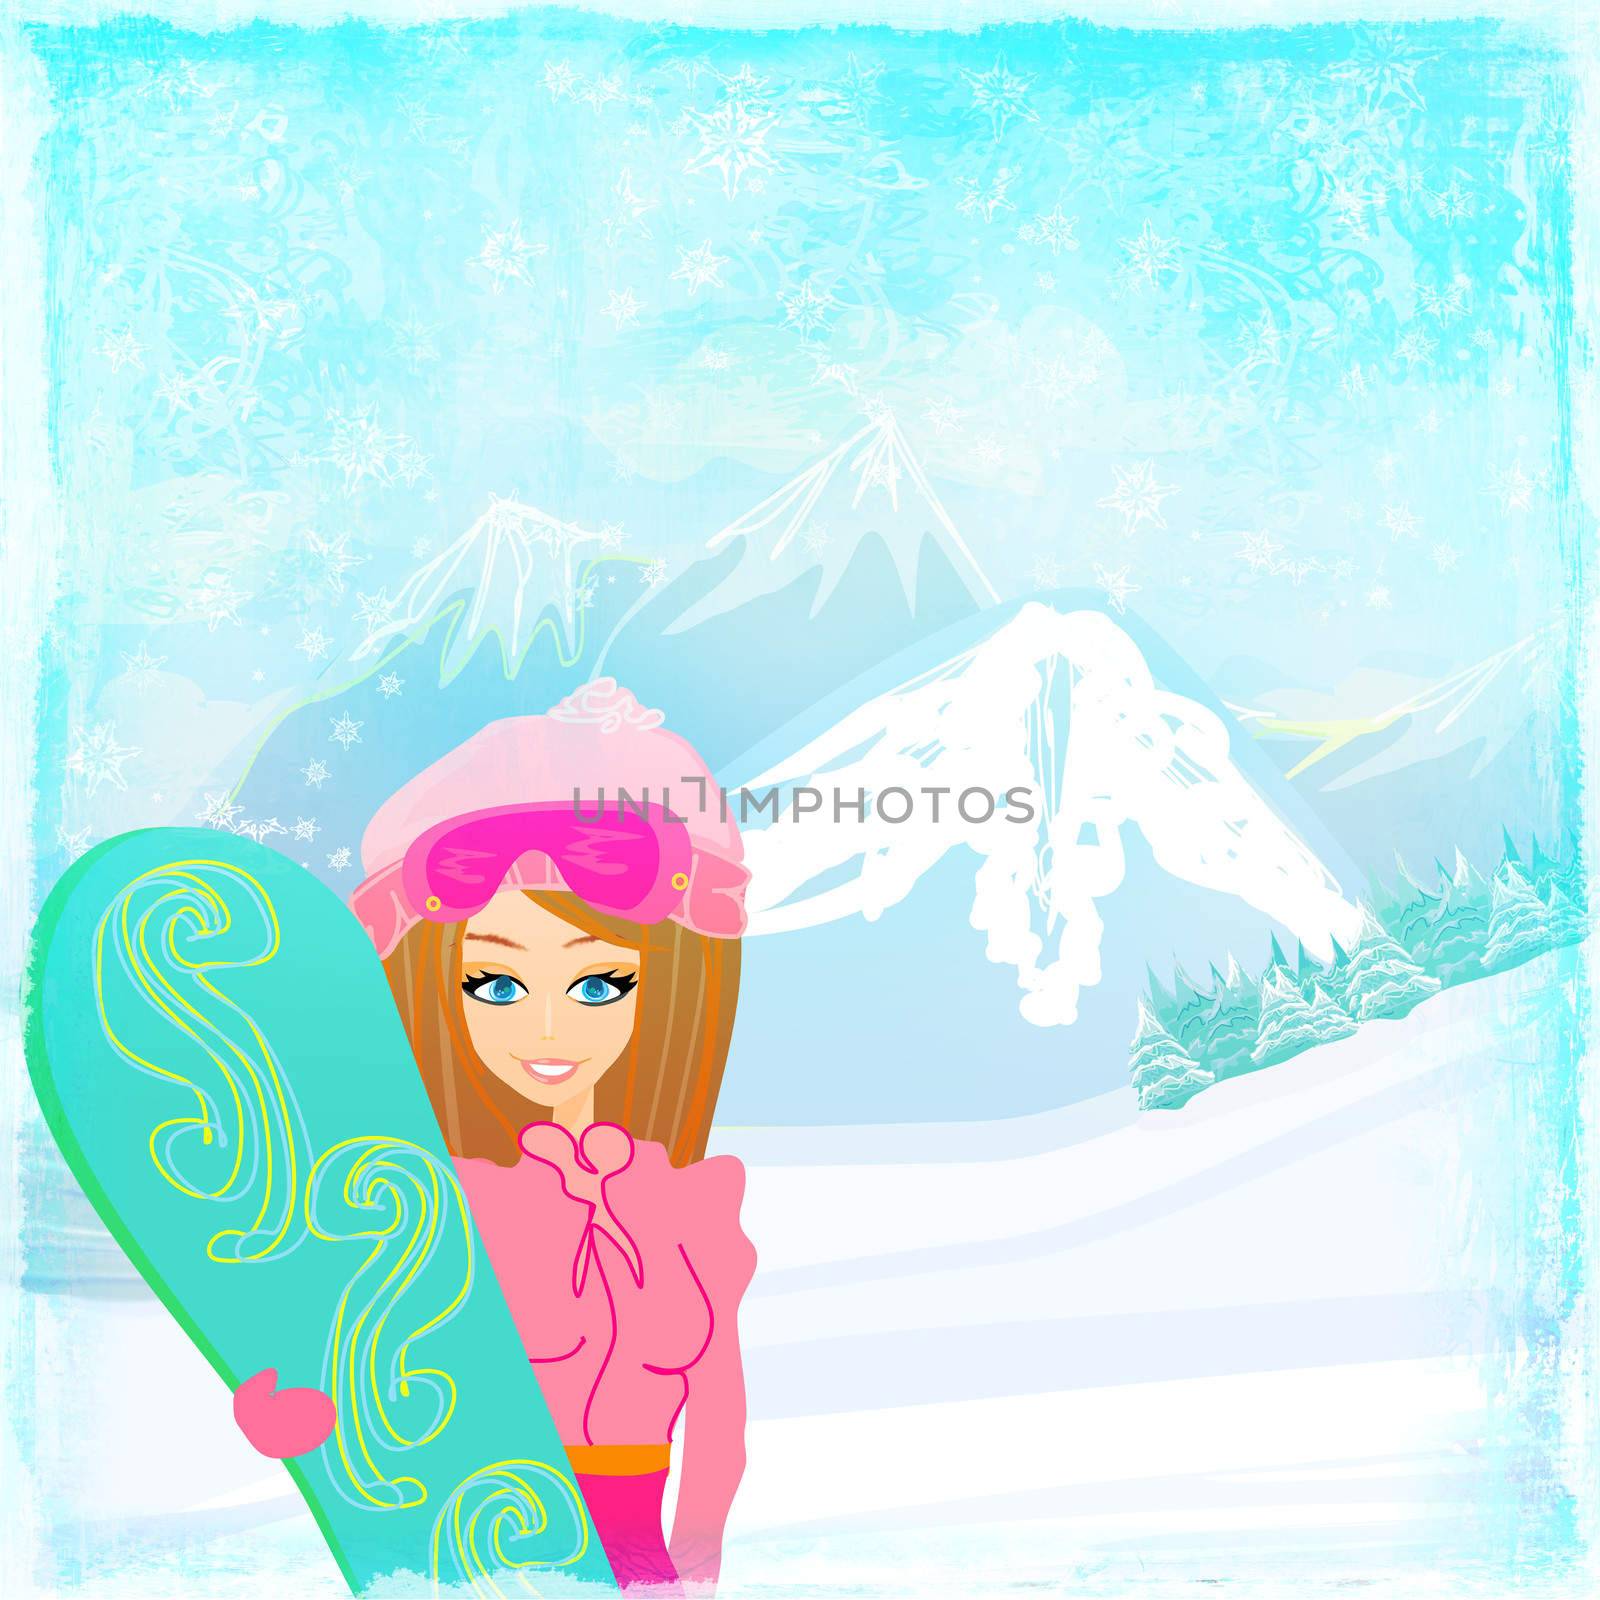 Girl with the snowboard